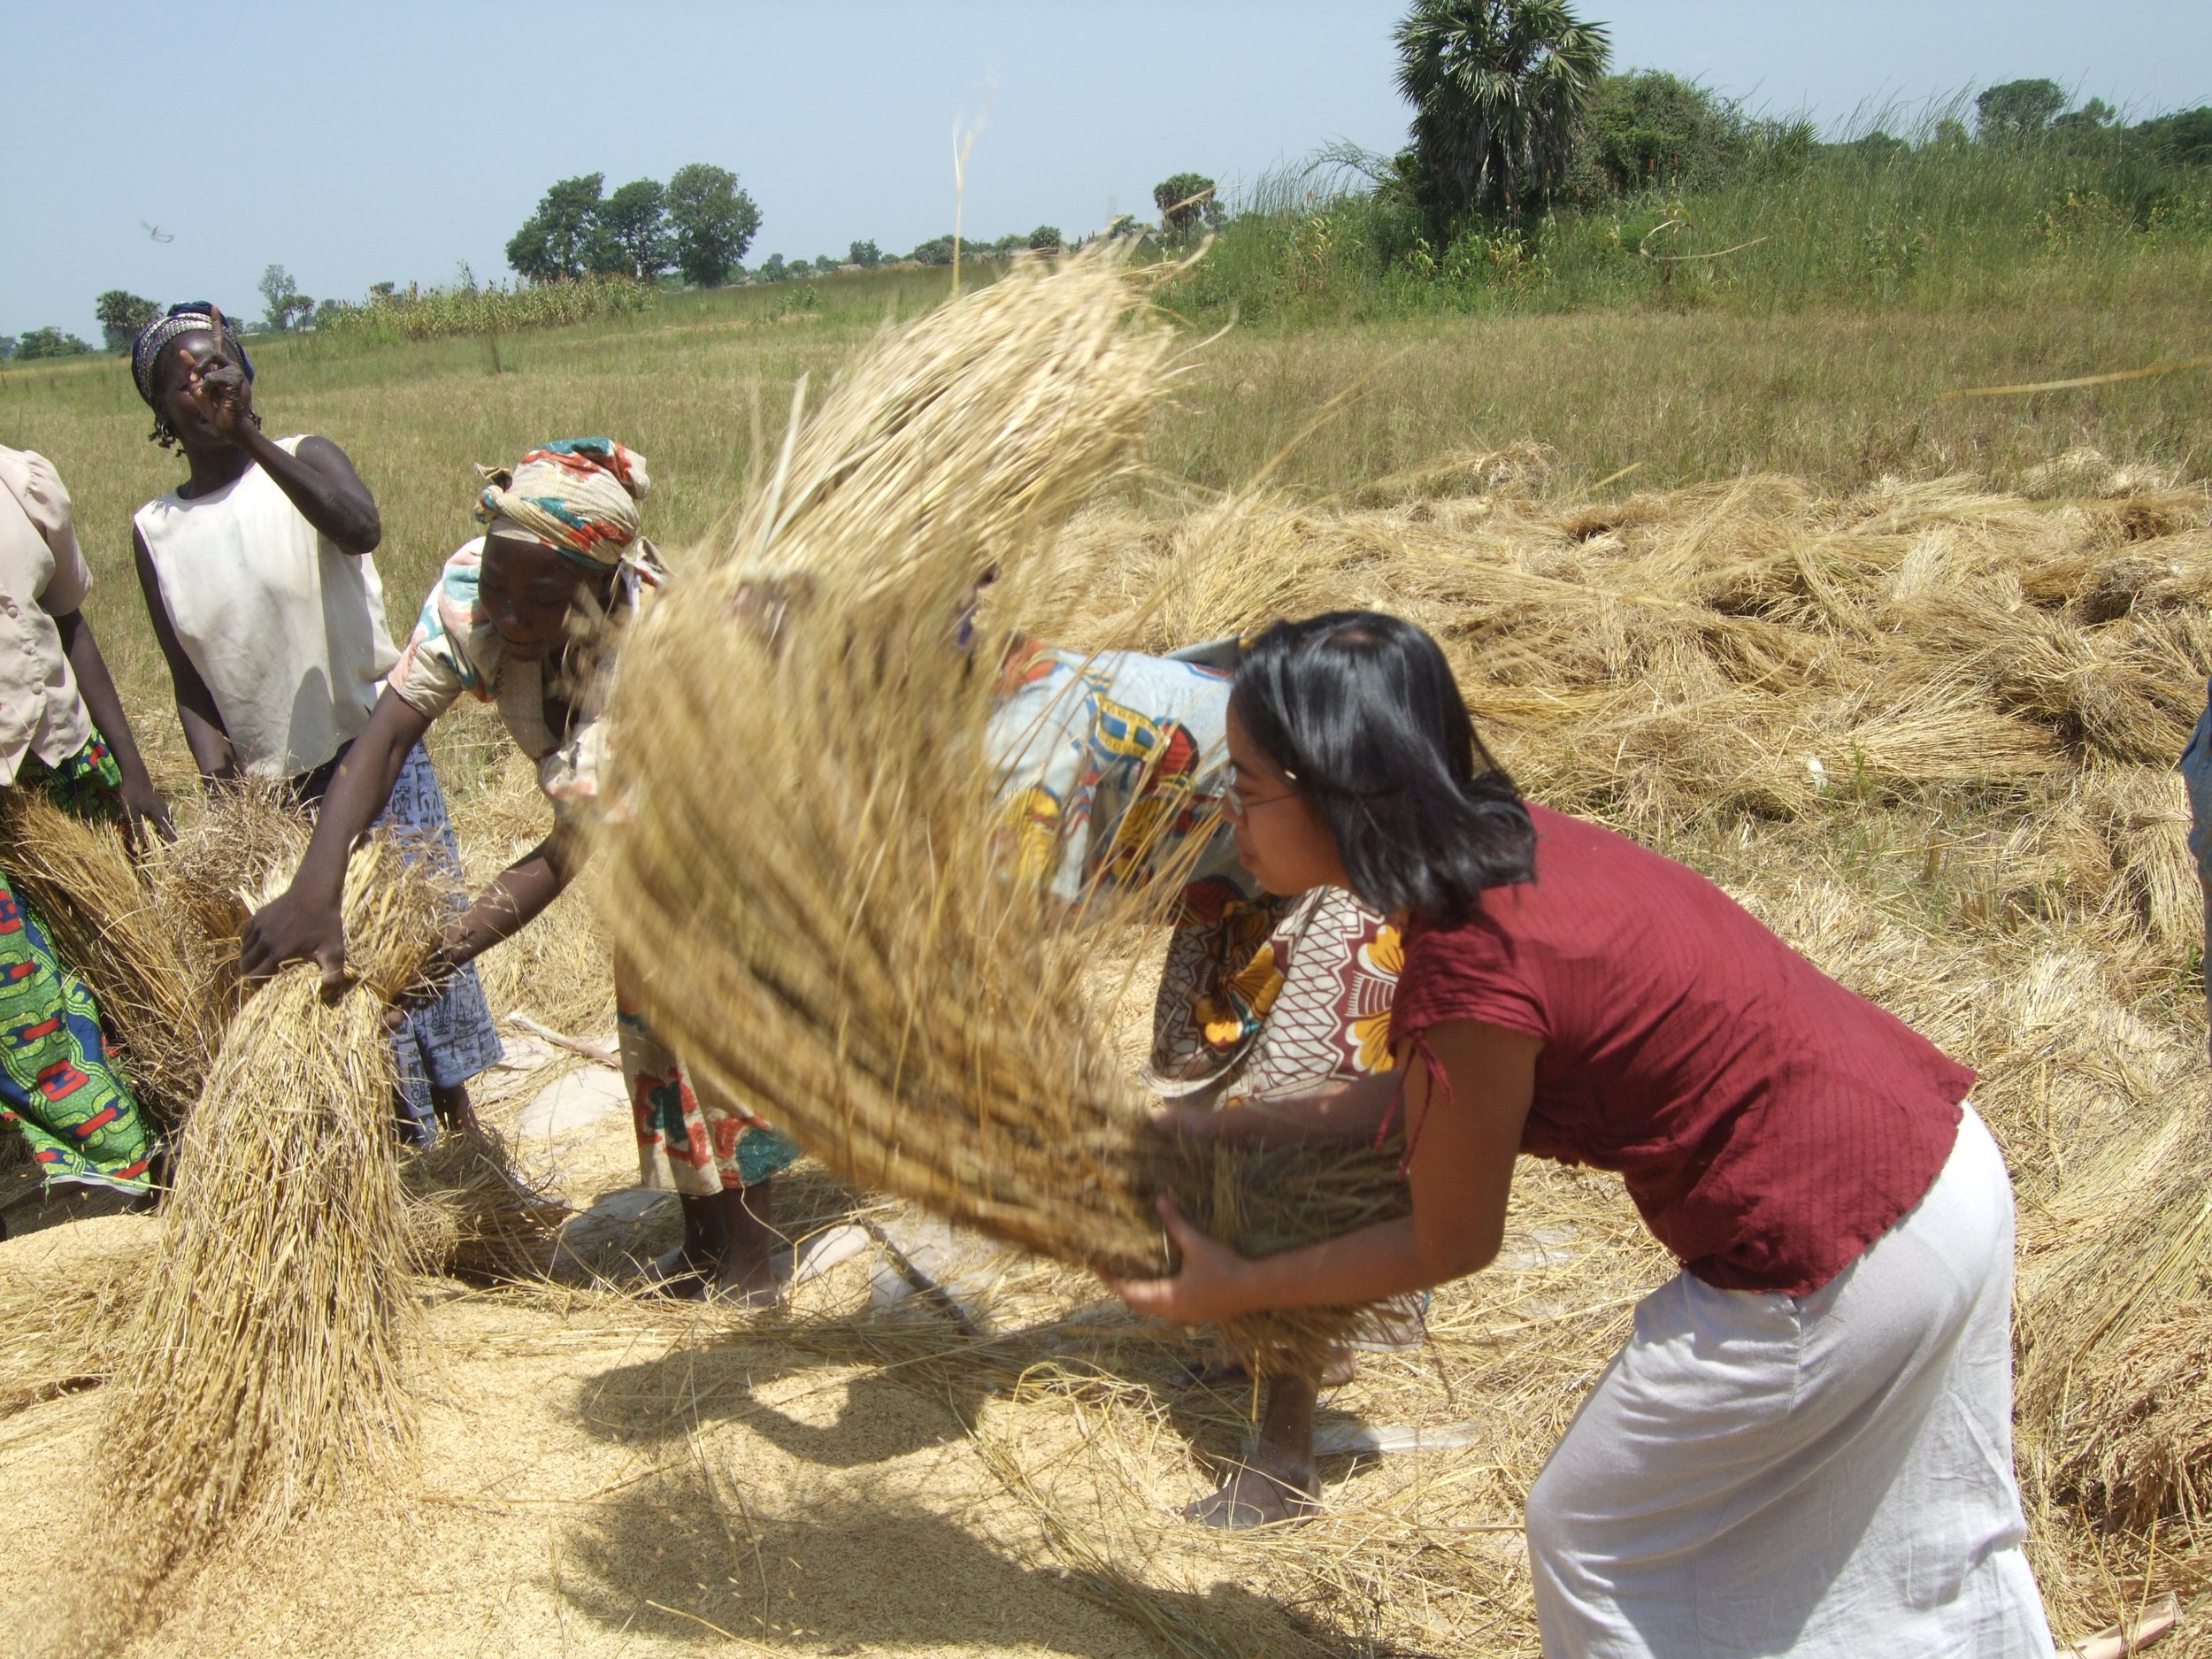 Annie helping villages with their harvest after arriving to volunteer in the local hospital